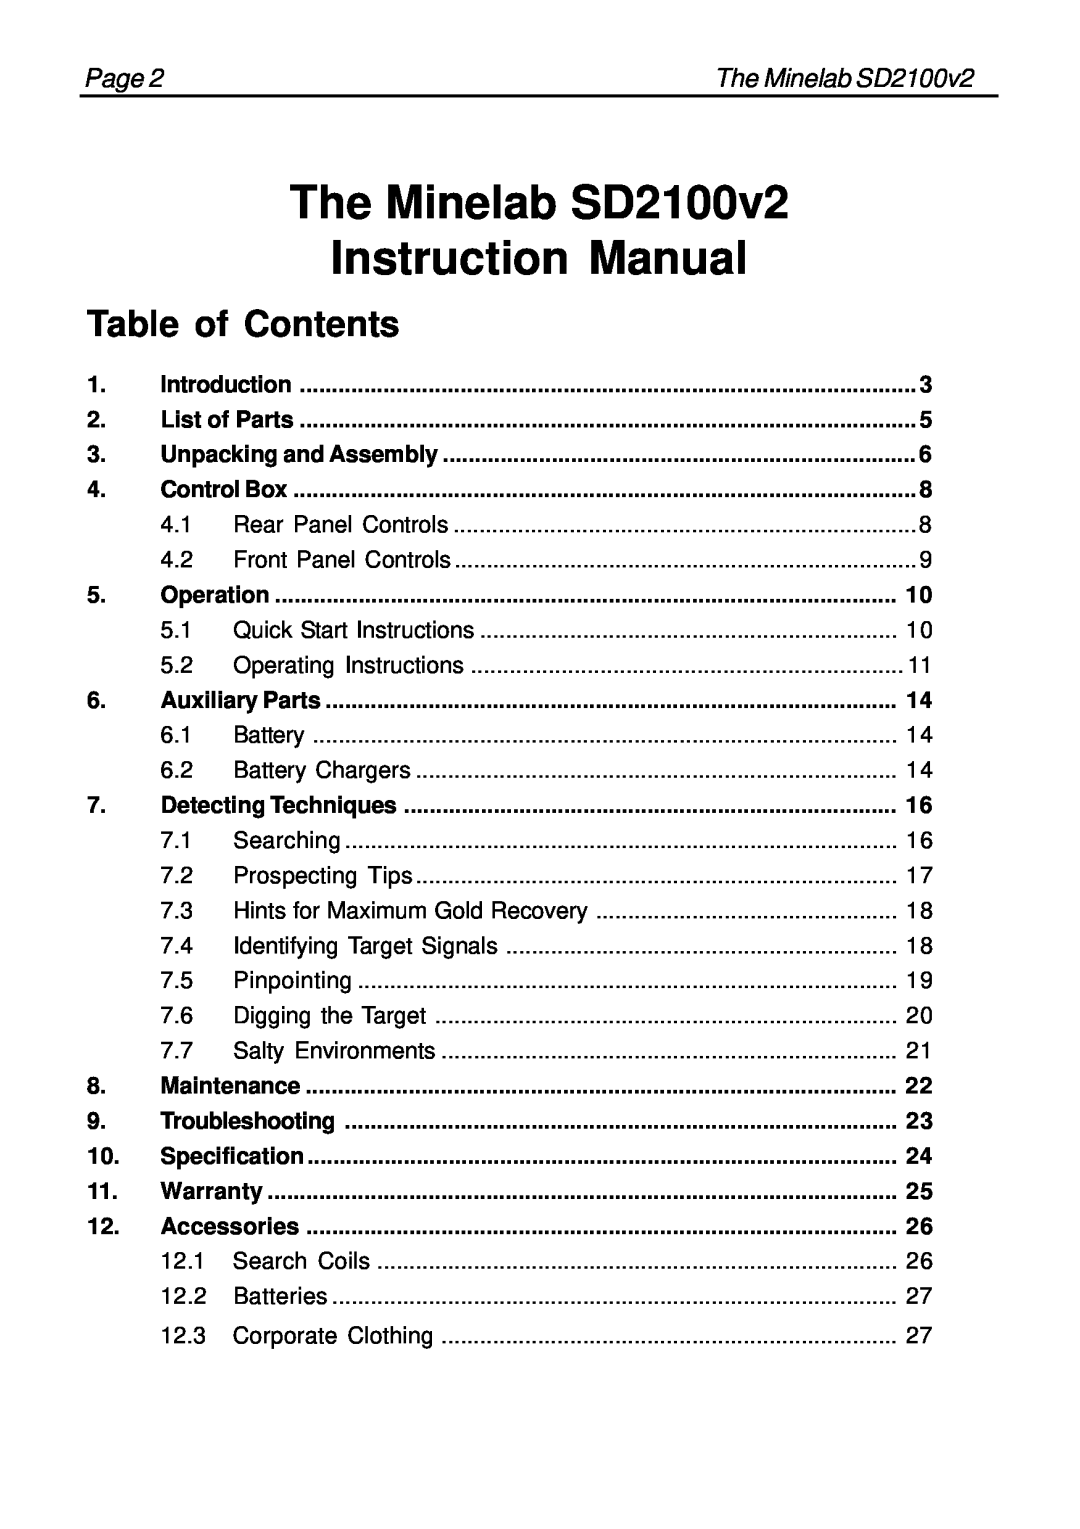 Minelab instruction manual Table of Contents, The Minelab SD2100v2 Instruction Manual, Page 